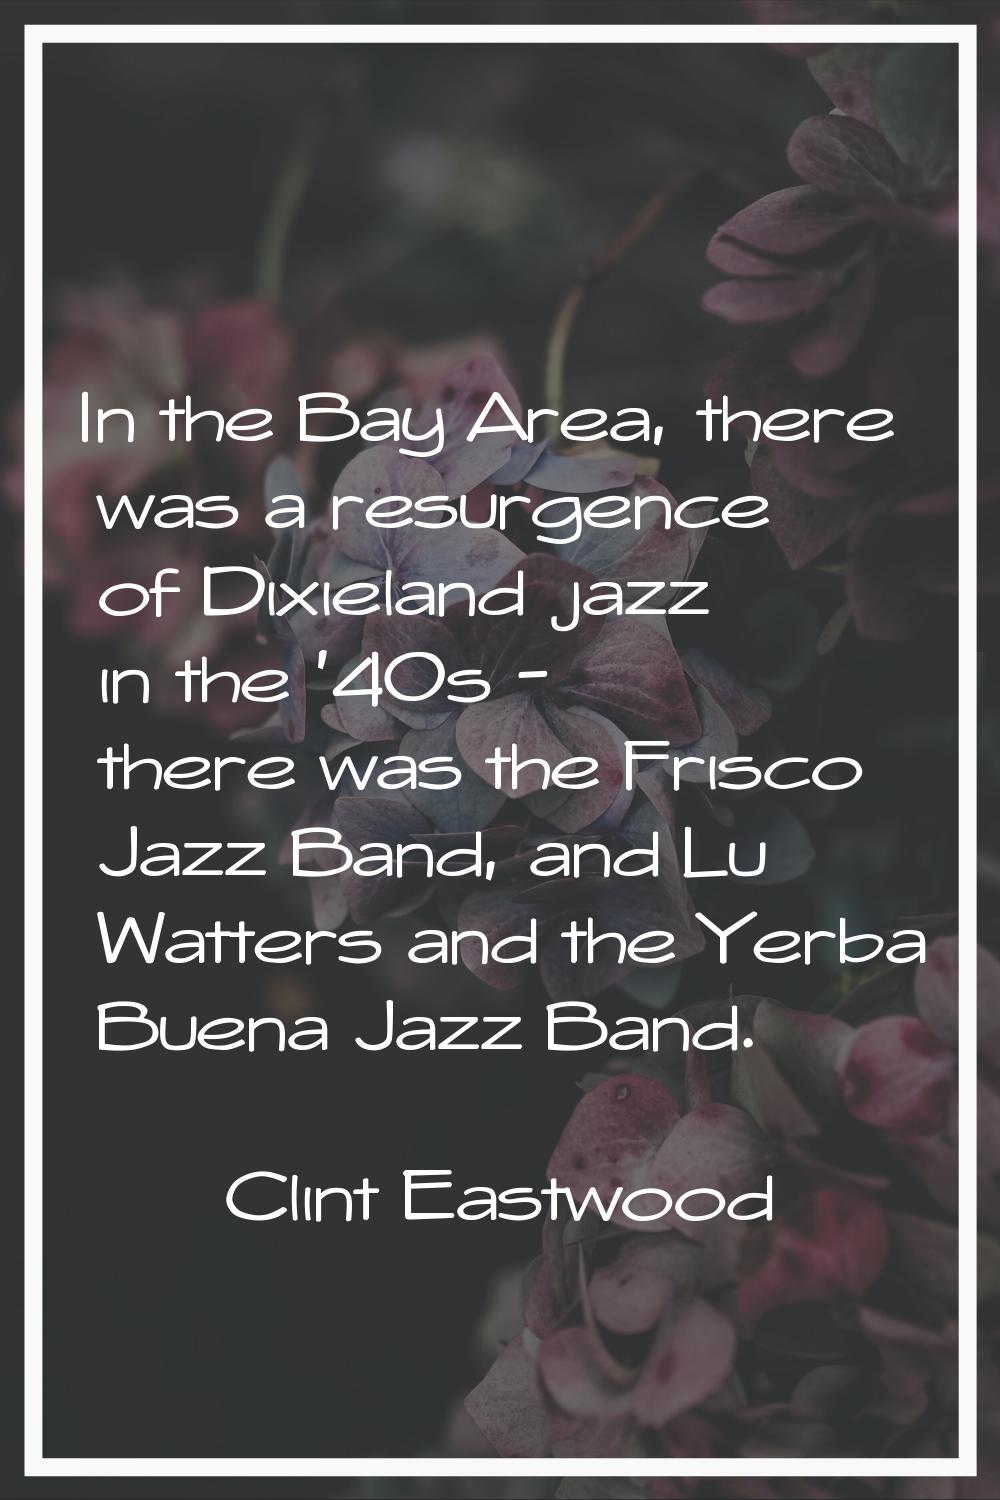 In the Bay Area, there was a resurgence of Dixieland jazz in the '40s - there was the Frisco Jazz B